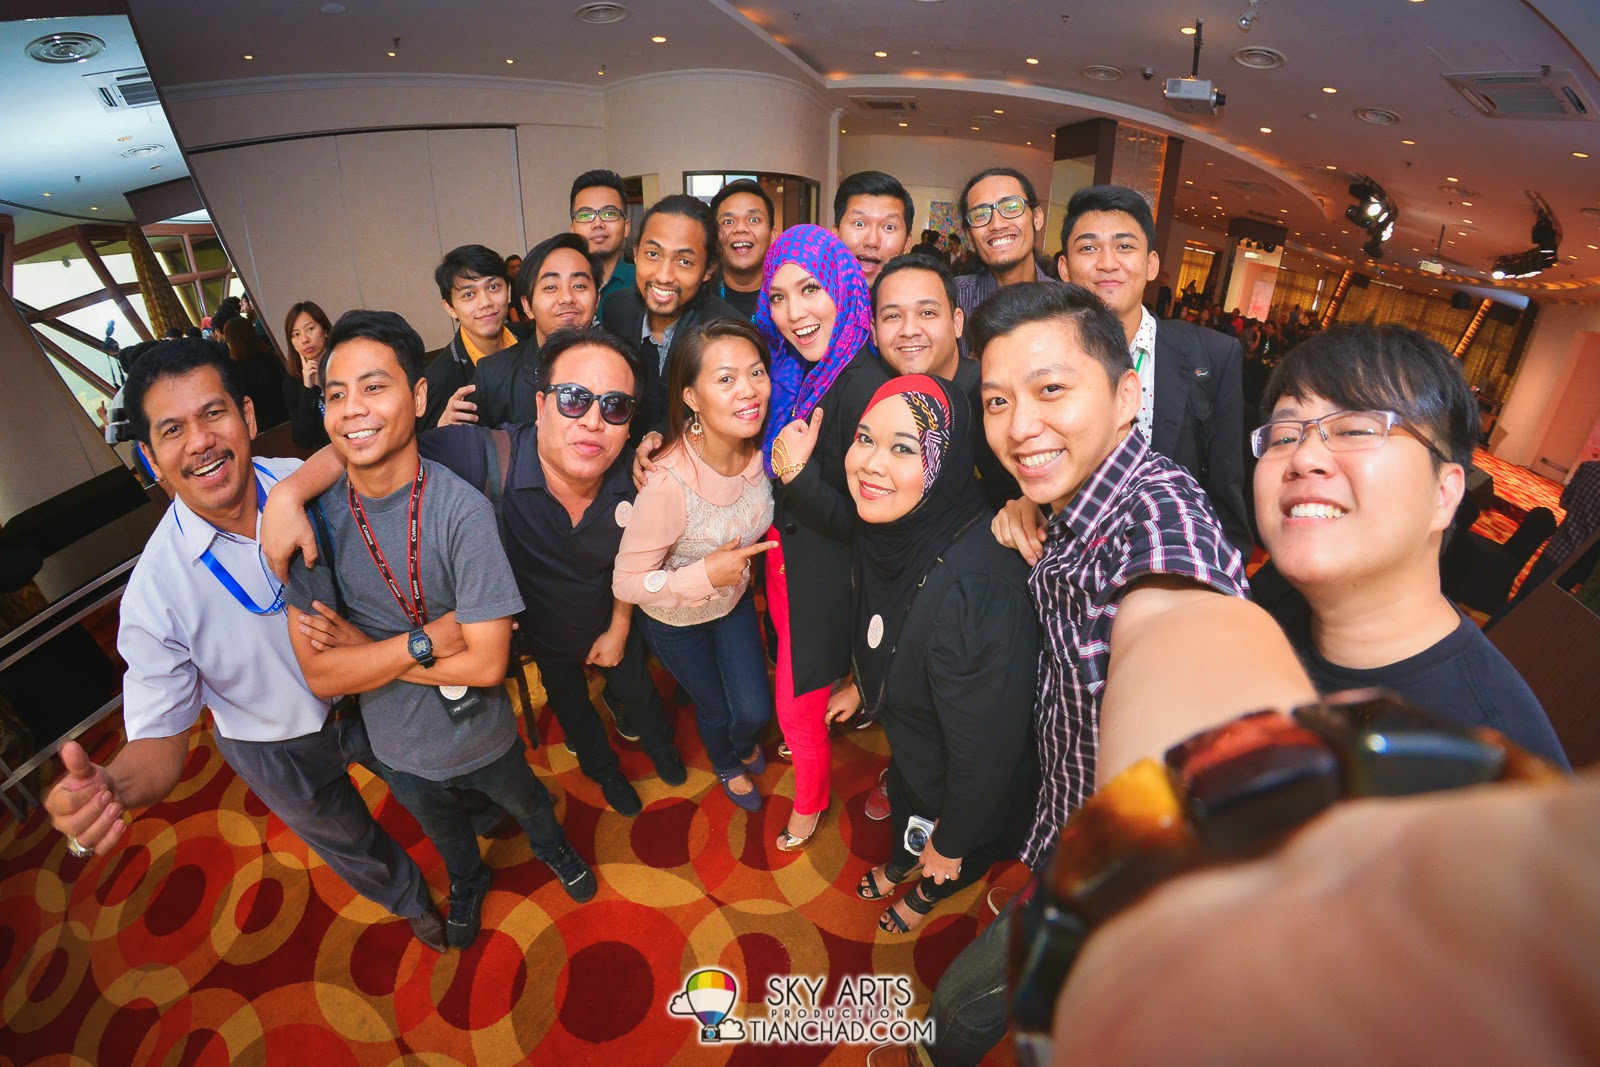 A bigger #TCSelfie with Shila Amzah and more media friends!! Thanks everybody!